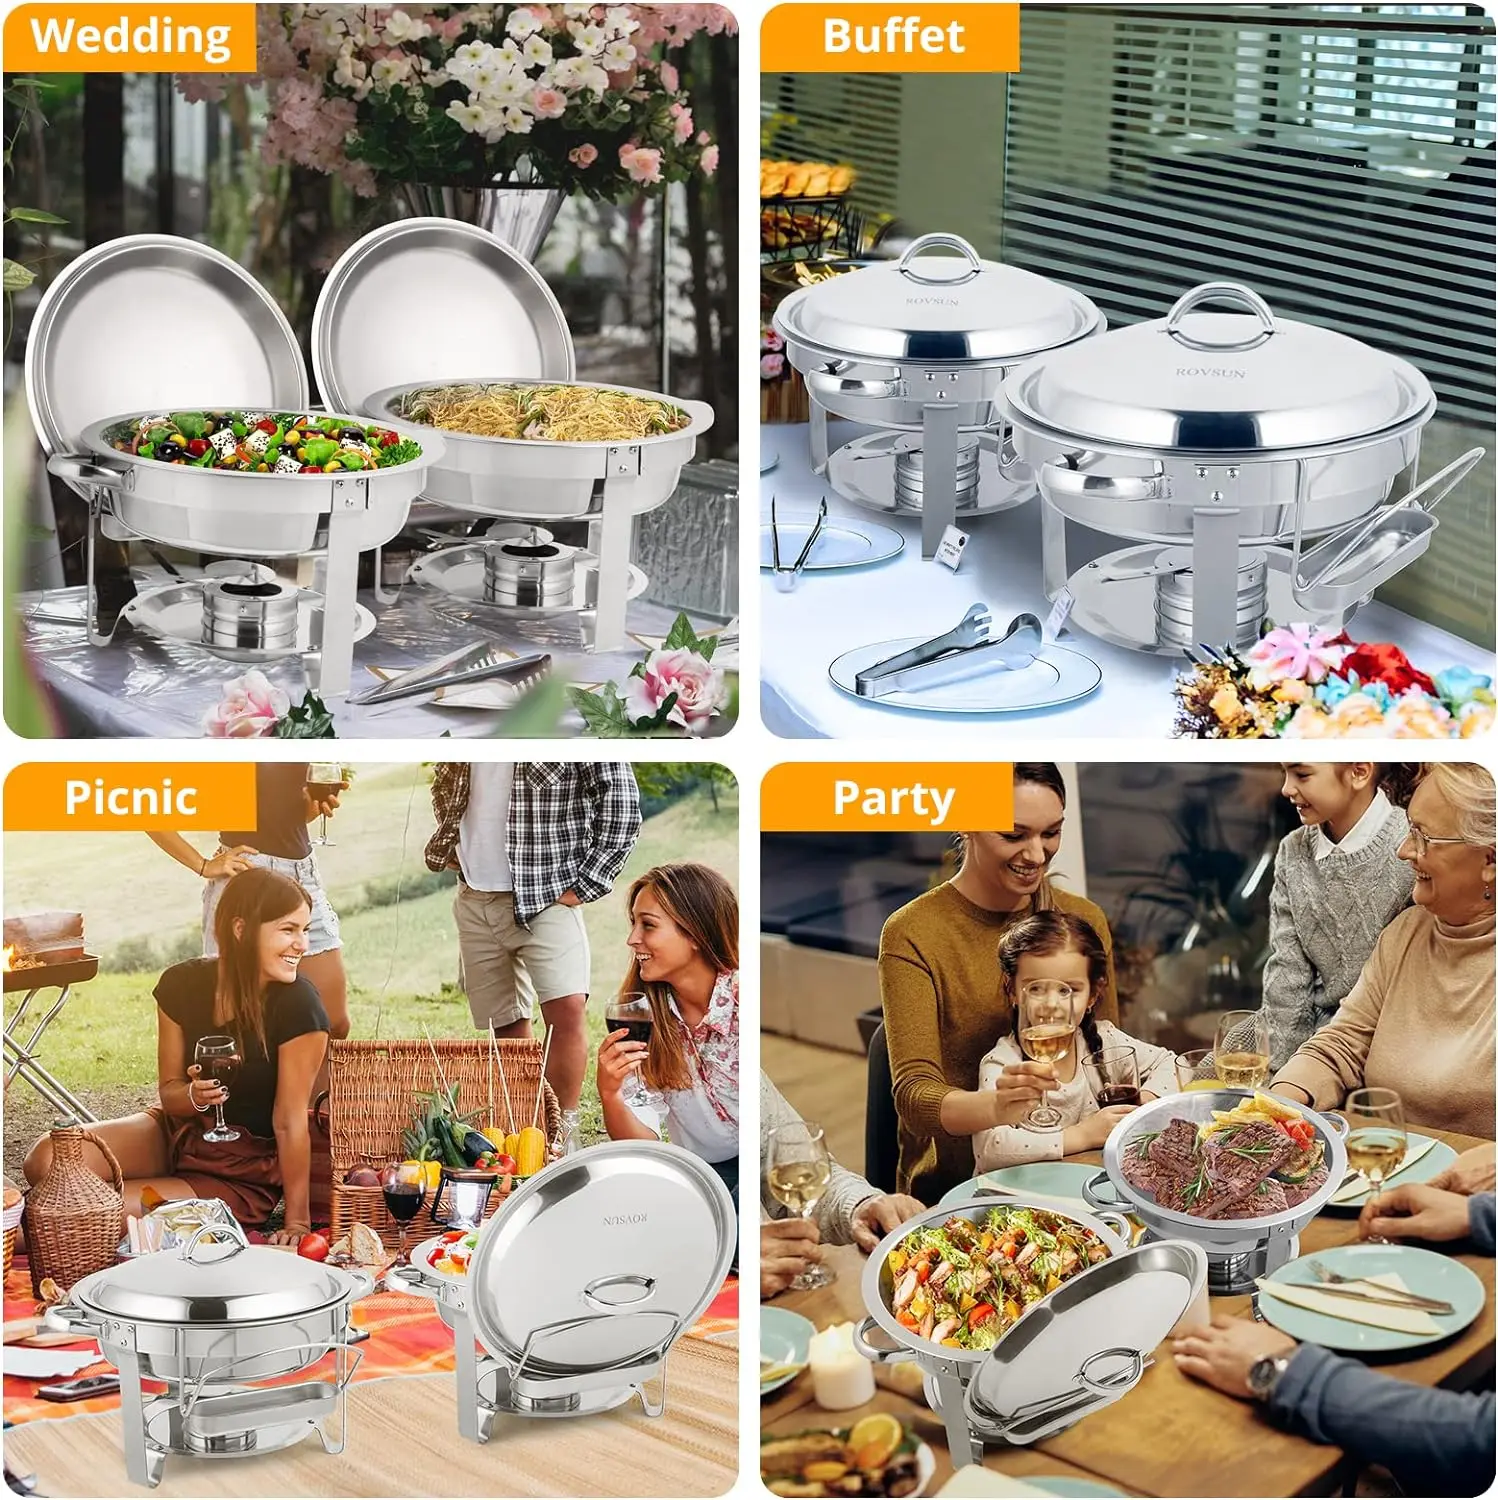 

5 Qt 4 Pack Chafing Dish Buffet Set,Stainless Steel Round Chafers for Catering, Buffet Servers and Warmers Set